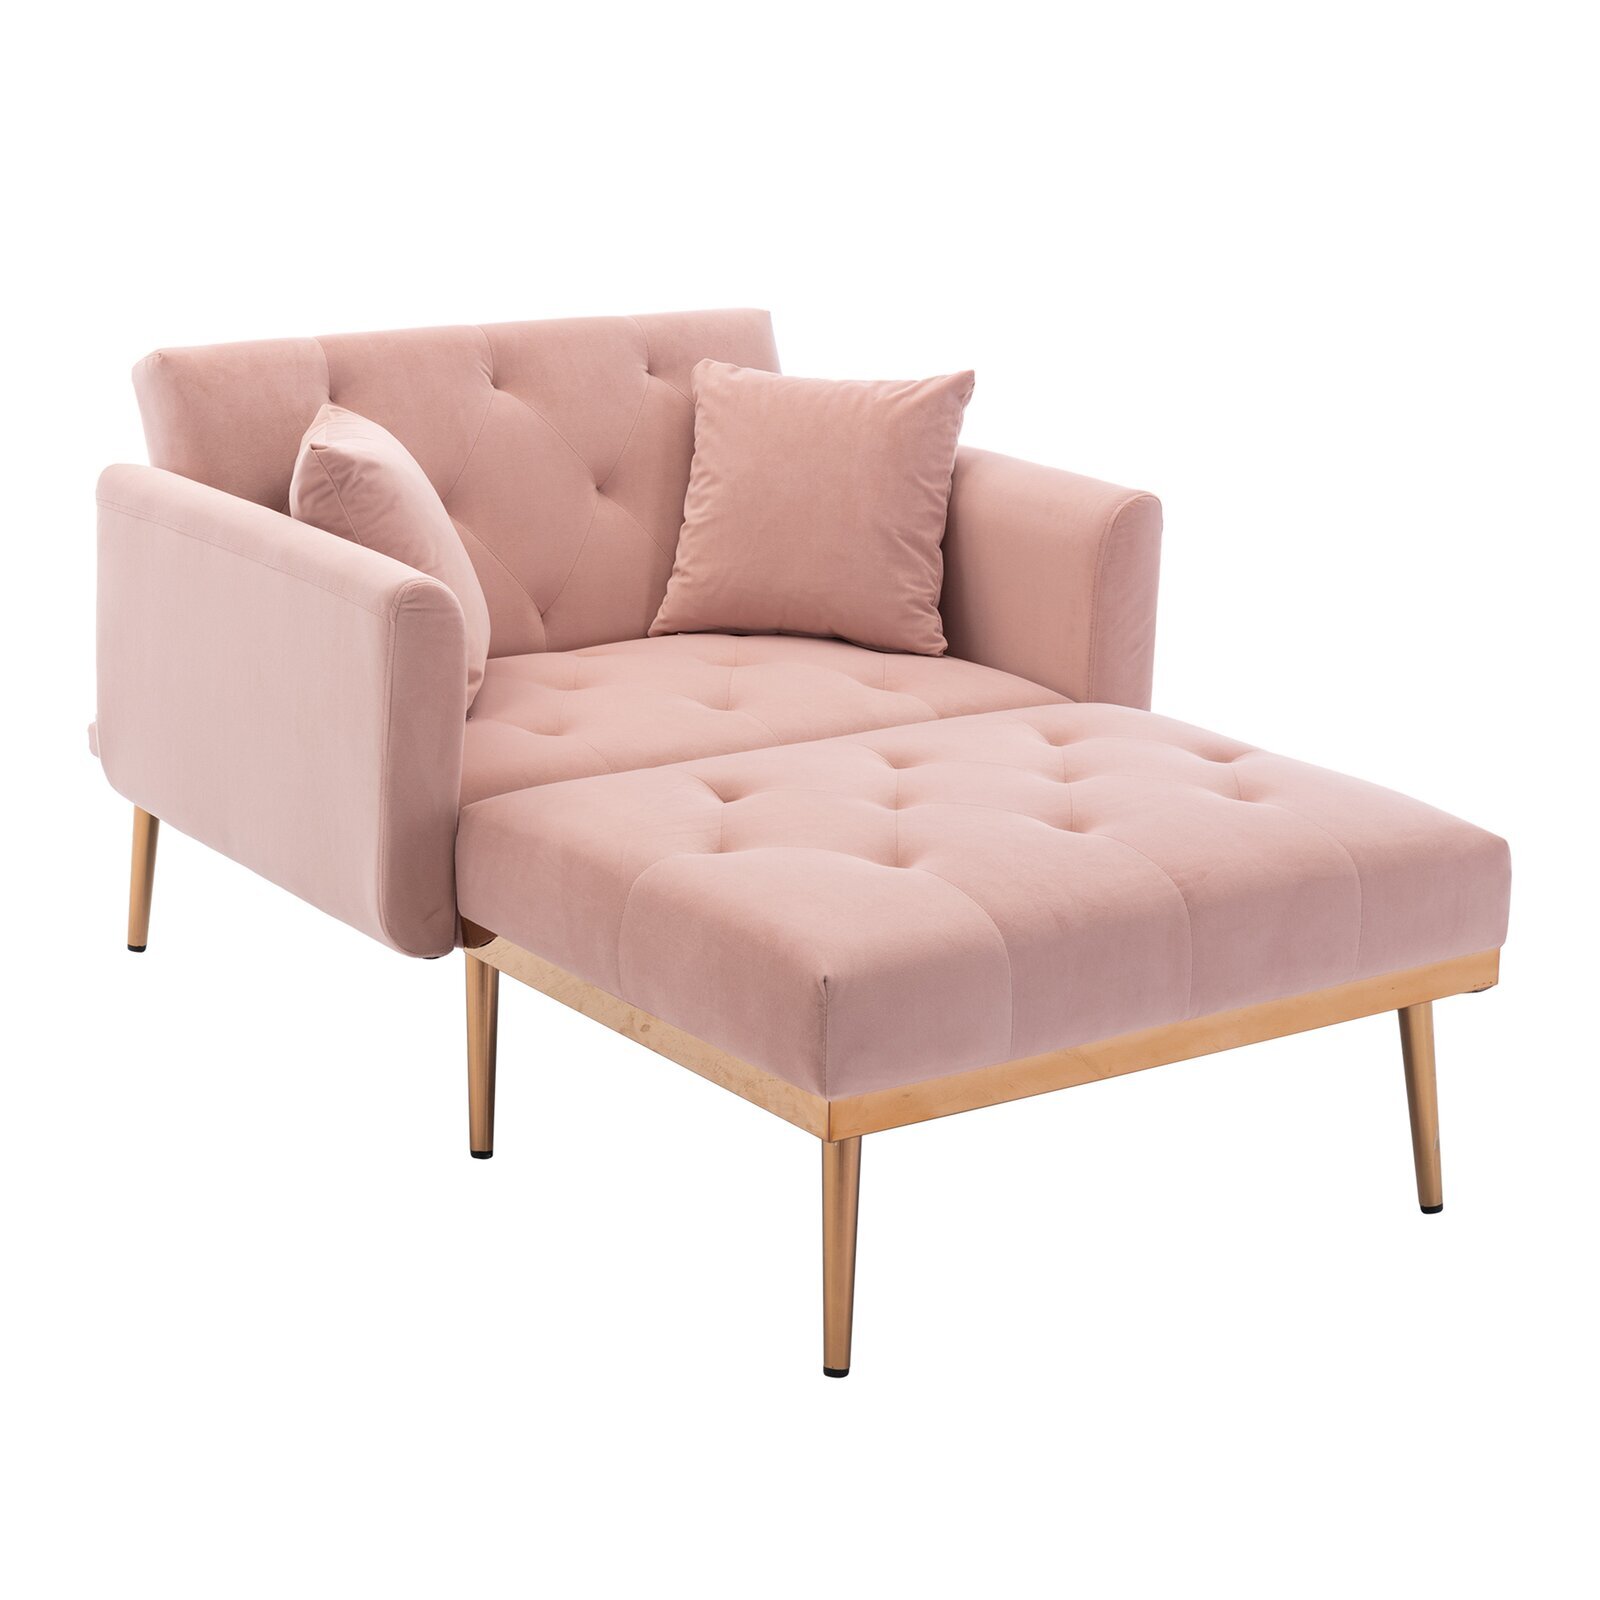 Tufted Velvet Fully Reclining Chaise Lounge Chair